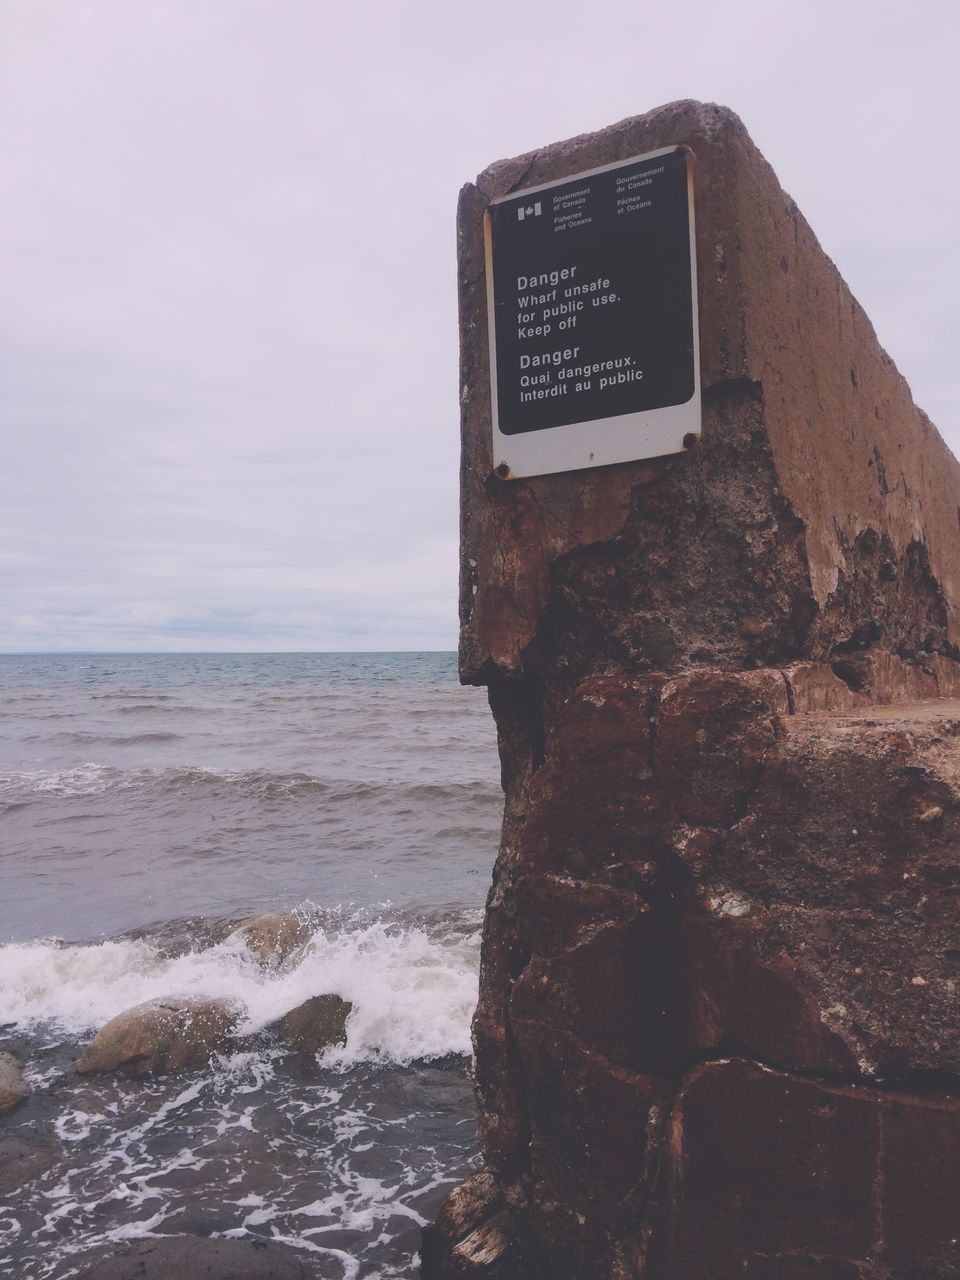 sea, water, horizon over water, sky, text, communication, western script, guidance, beach, shore, built structure, nature, scenics, day, building exterior, tranquility, rock - object, architecture, outdoors, tranquil scene